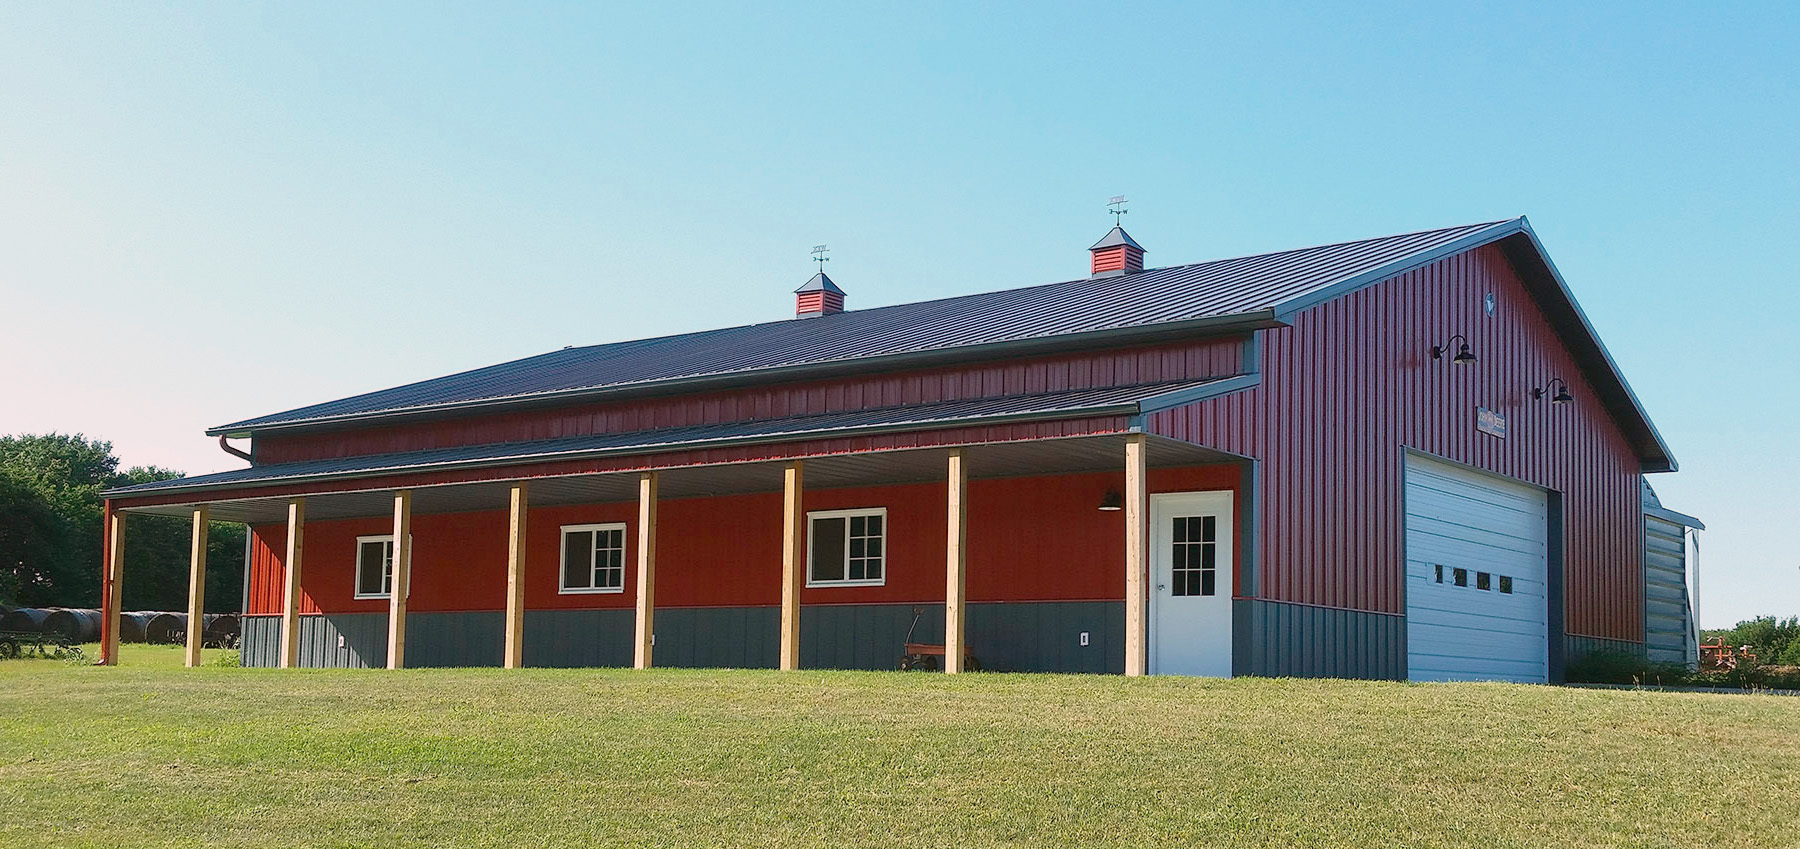 Equestrian Stables and Horse Barns